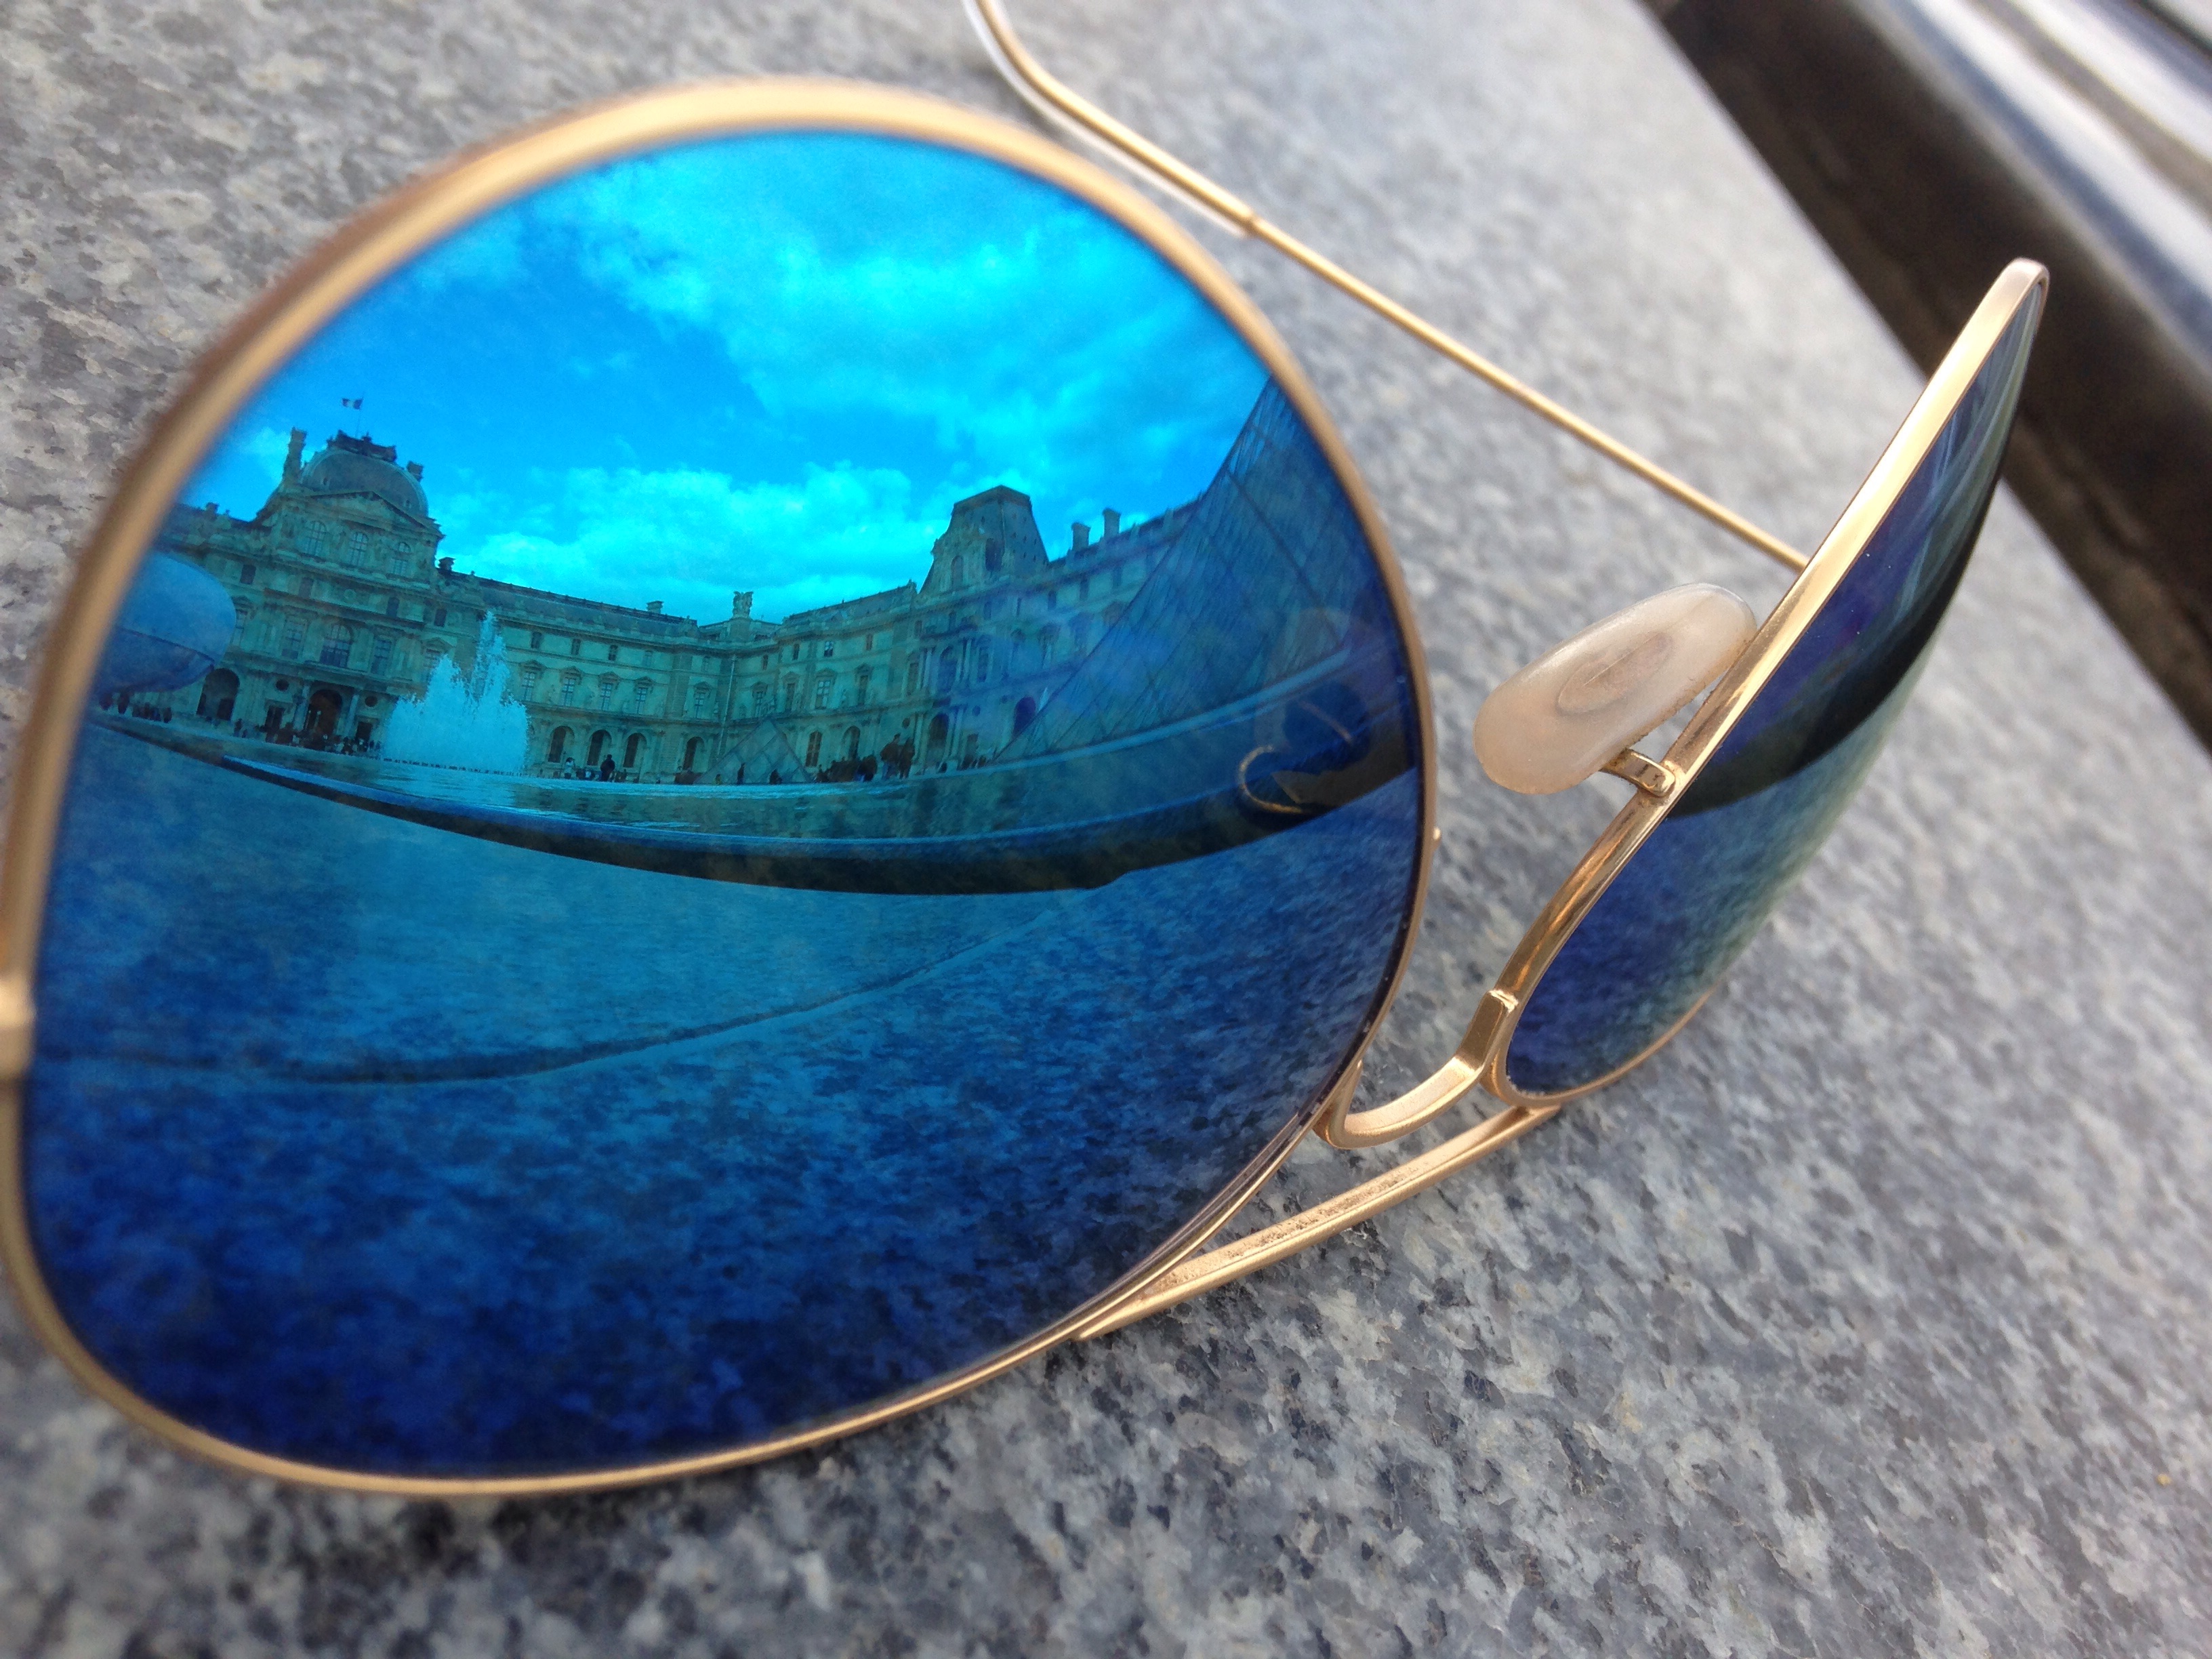 Louvre reflected in sunglasses